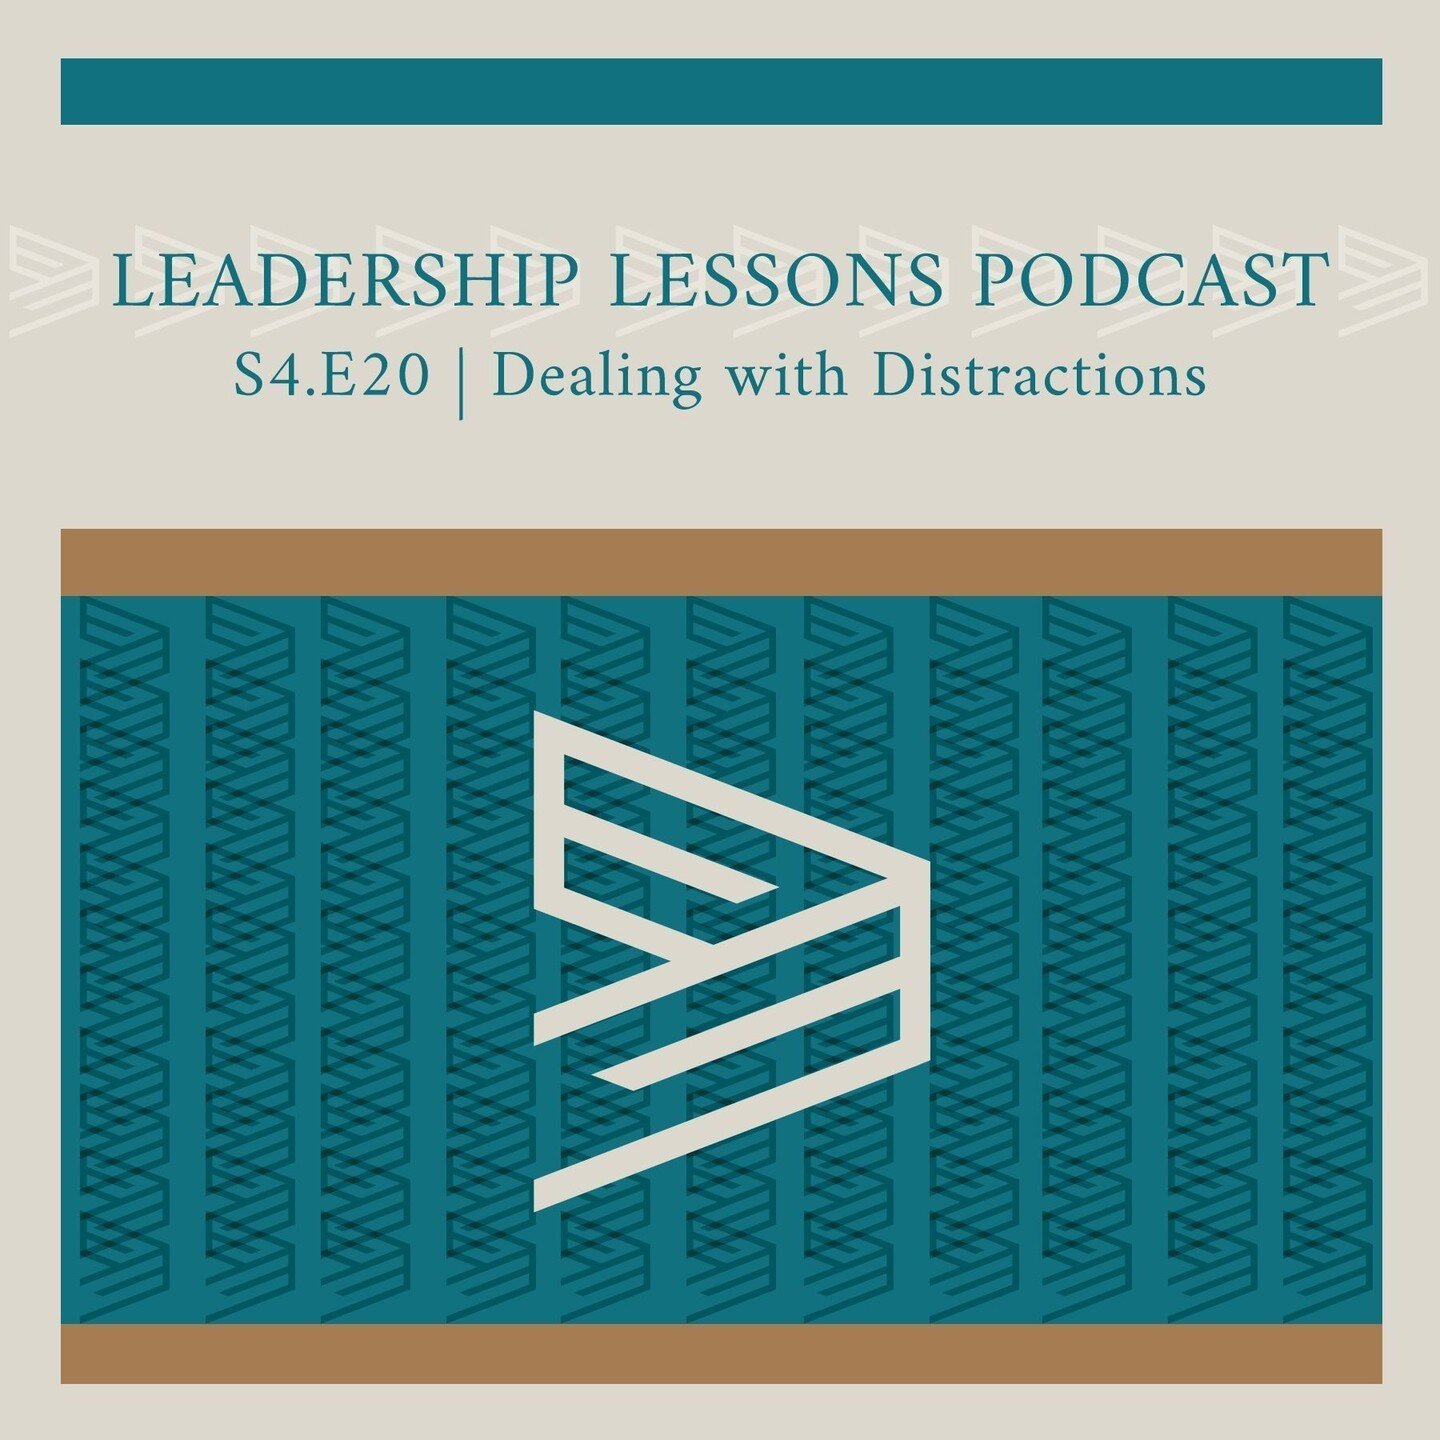 EE Leaders | Leadership Lessons Podcasts Season 4 Episode 20 - Dealing With Distractions
In this week&rsquo;s episode from Nehemiah 6, Pastor Daniel talks about how the enemy uses distractions to keep us from accomplishing the work God has called us 